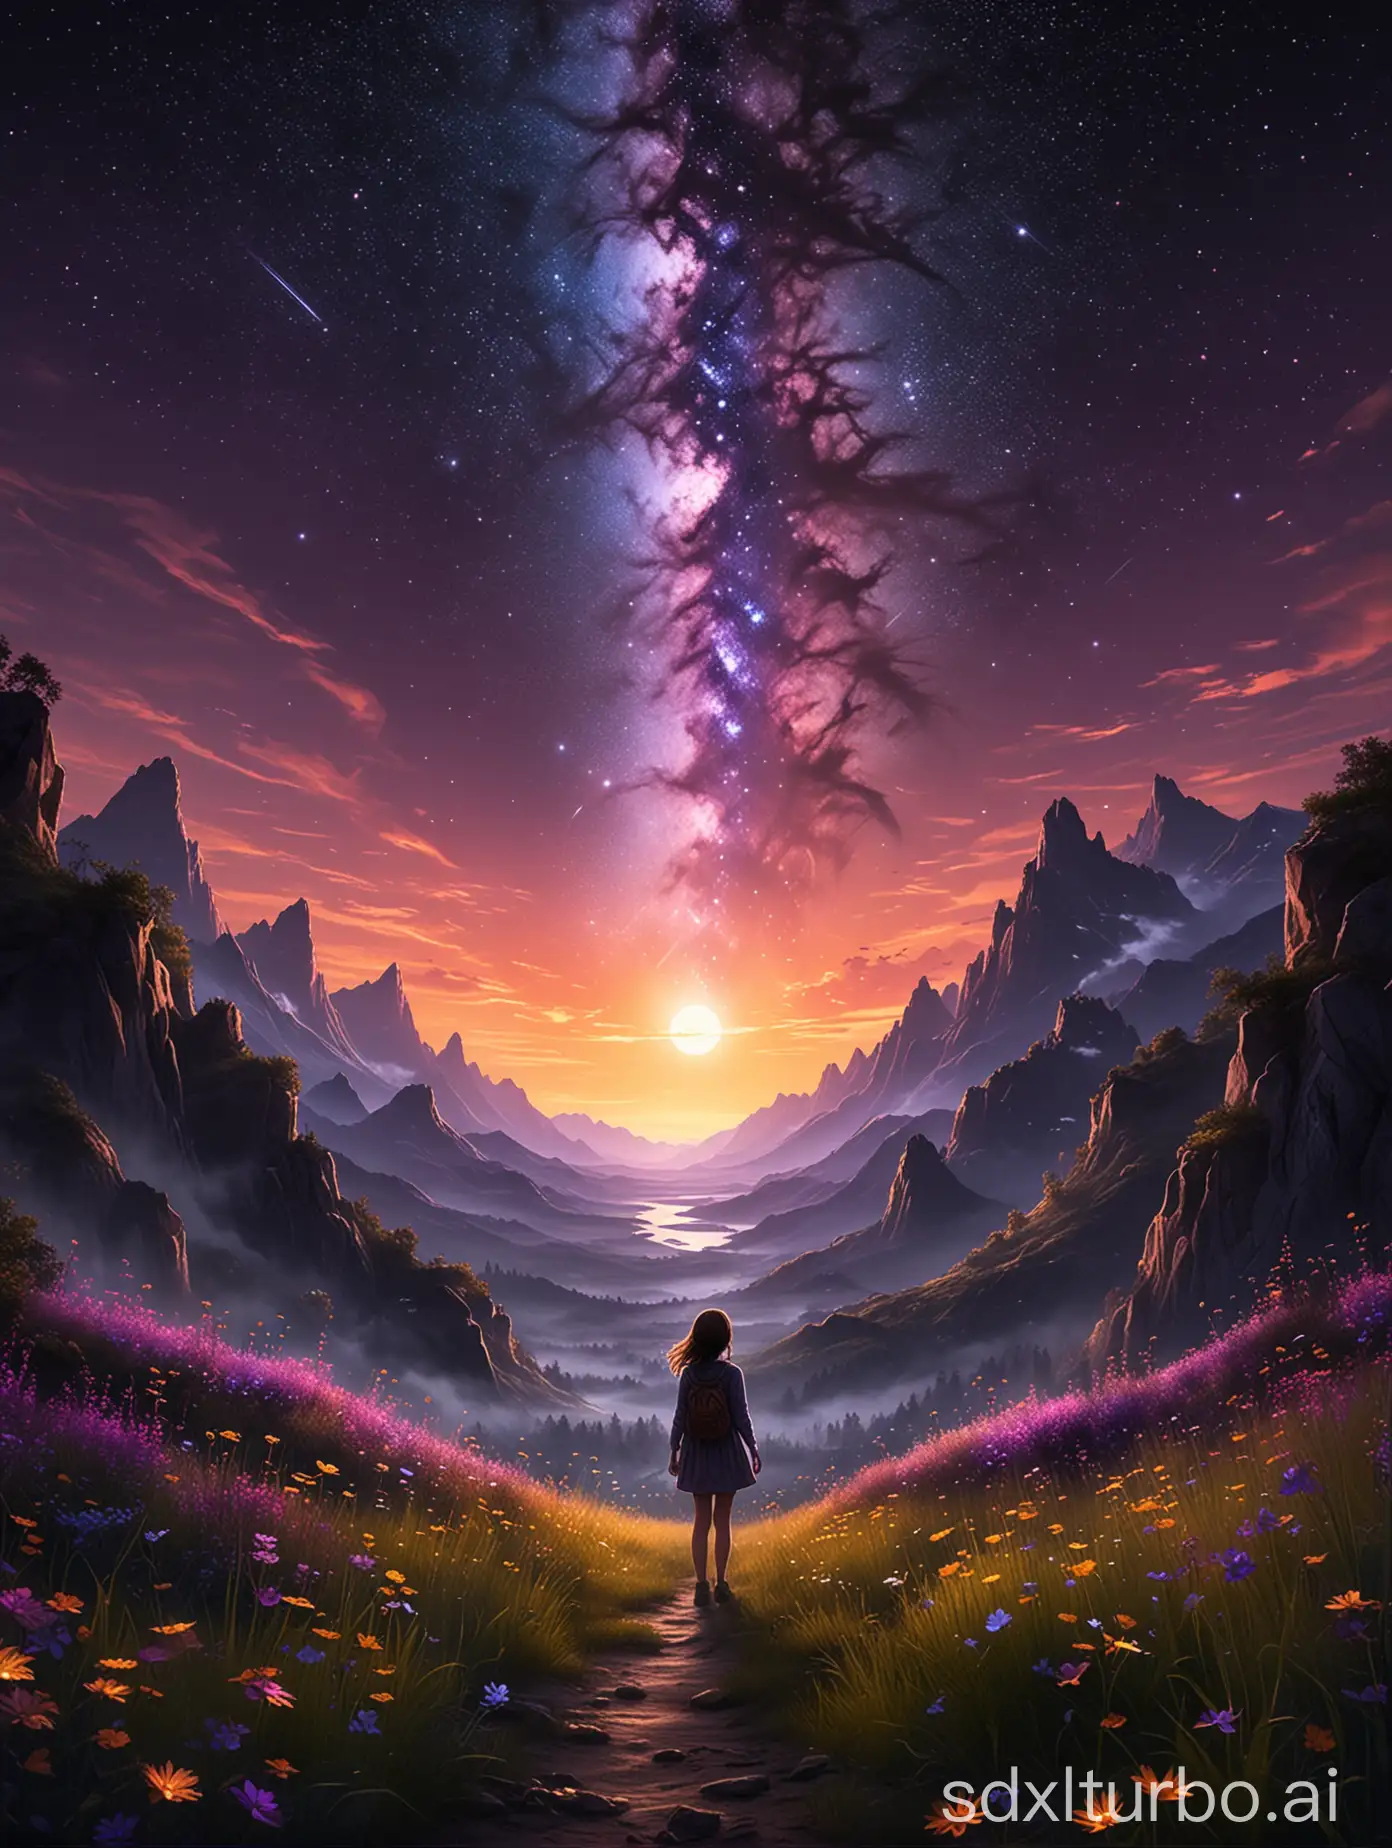 Creating vast landscape photographs captured from below, with the sky stretching above and wilderness spreading below. In the center of the image, a little girl stands amidst a field of flowers, looking up at the sky. The full moon shines brightly with a brightness of 1.2, gently illuminating the scene. Shooting stars, rated 0 with a brightness of 9, streak across the sky, leaving a bright trail behind her. Diffuse nebulae, with a brightness of 1.3, add a mysterious atmosphere to the bottom of the sky.

Majestic mountains tower on the horizon, blending into purple and orange gradients symbolizing dusk. Artistry producing the wind of trees gently invigorates the leaves, emitting a calm atmosphere. The source of warm light, rated 1 with an intensity of 2, brightens the stage and emphasizes the details.

Fireflies flutter around the girl, emitting a soft and pleasant light. Lamps placed at her feet emit a modest glow, creating a magical atmosphere. Every intricate detail of the scene is accurately rendered in 4K resolution, with outstanding quality and ultra-detail. Dynamic composition of 1.4 enhances the impression of depth and movement.

The details of nature are particularly vivid and colorful, with iridescent effects observed at 1.2 bursts. Glittering lights emphasize texture, while ambient lighting envelops everything in a dream-like atmosphere. Overall, a magical dream-like atmosphere pervades, capturing moments frozen in time. This piece, a true masterpiece rated 1.2 for its exceptional quality, invites awe and contemplation.

All of these occur in solitary settings, appearing to merge harmoniously with nature. Under the pseudonym Lunarlagoon, this impressive image beckons viewers into a world where reality and imagination blend.